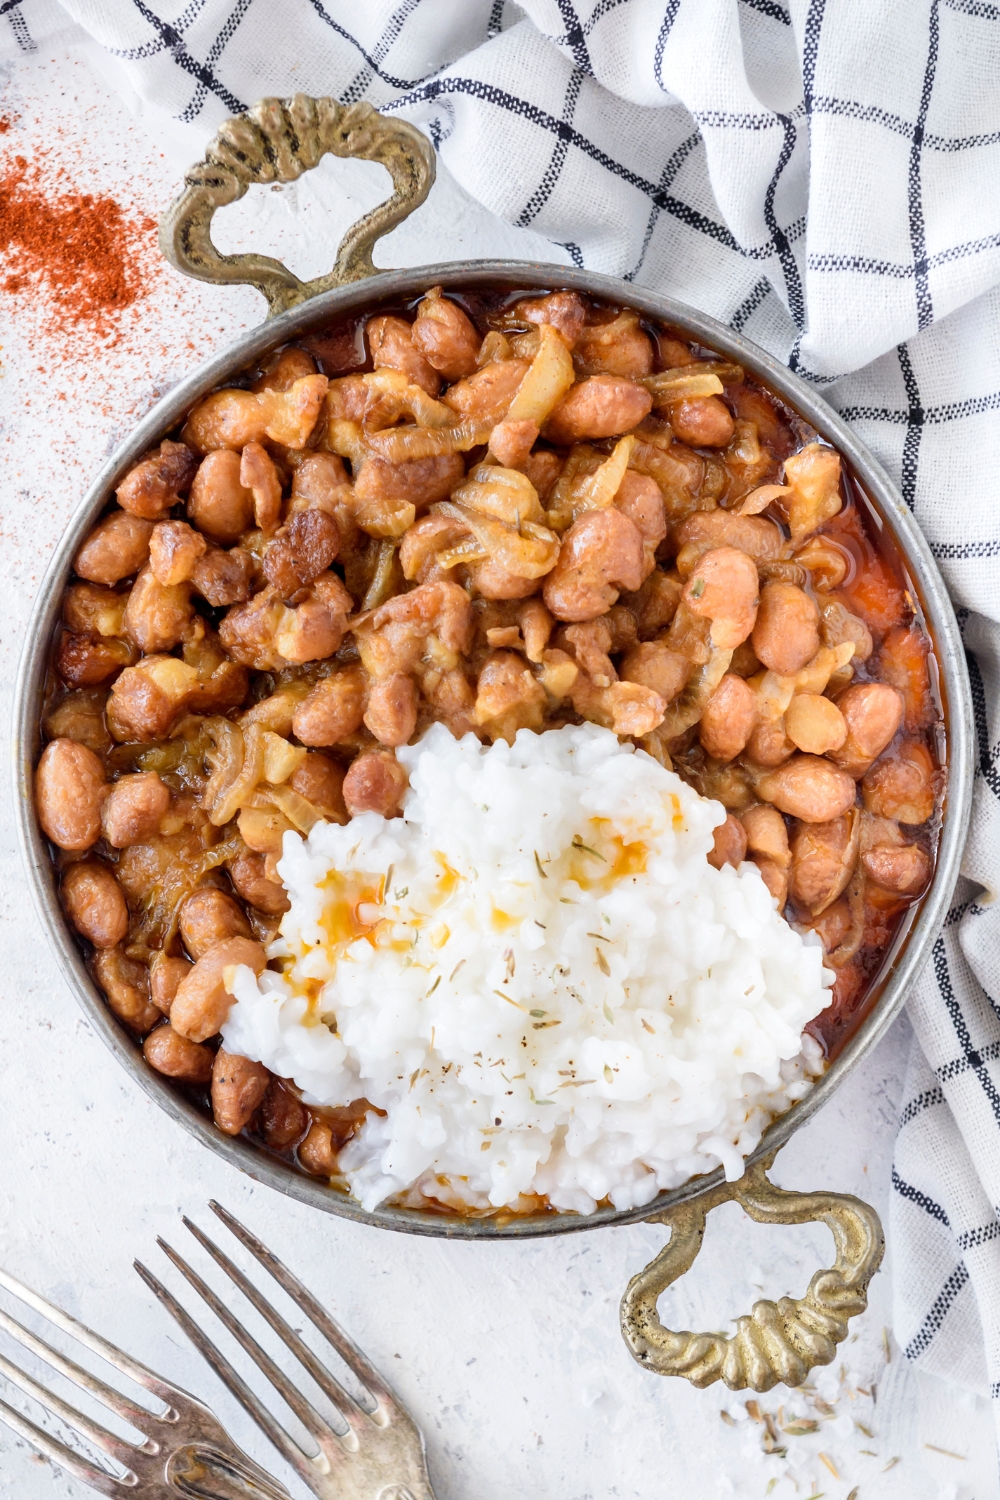 A bowl of cooked pinto beans mixed with cooked onions and a side of white rice.